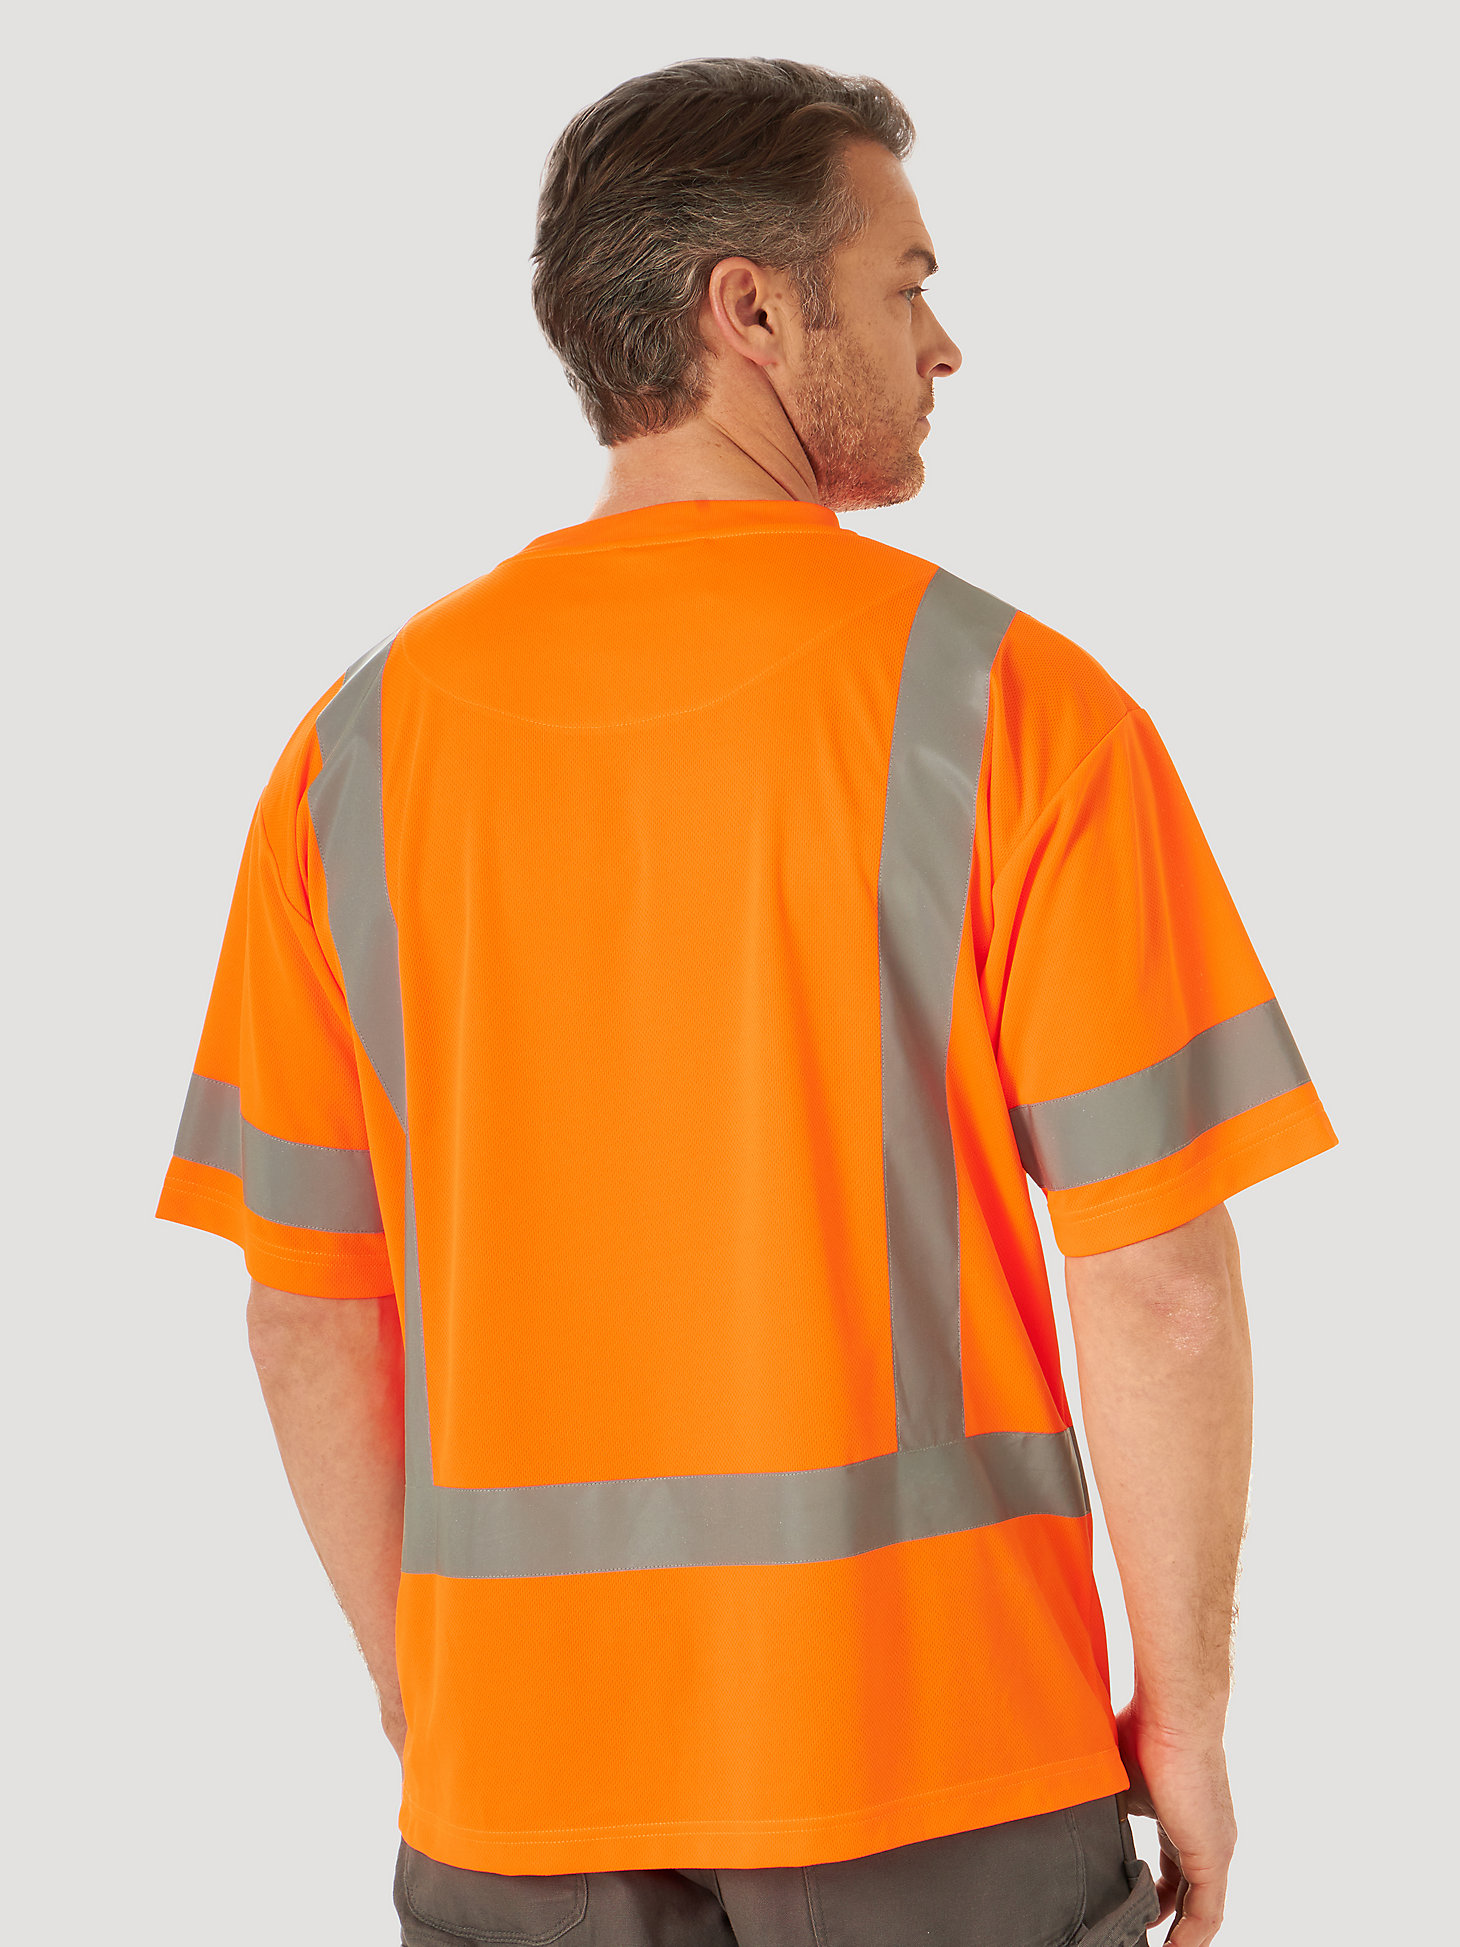 Wrangler® RIGGS Workwear® Short Sleeve High Visibility T-Shirt in Safety Orange alternative view 1